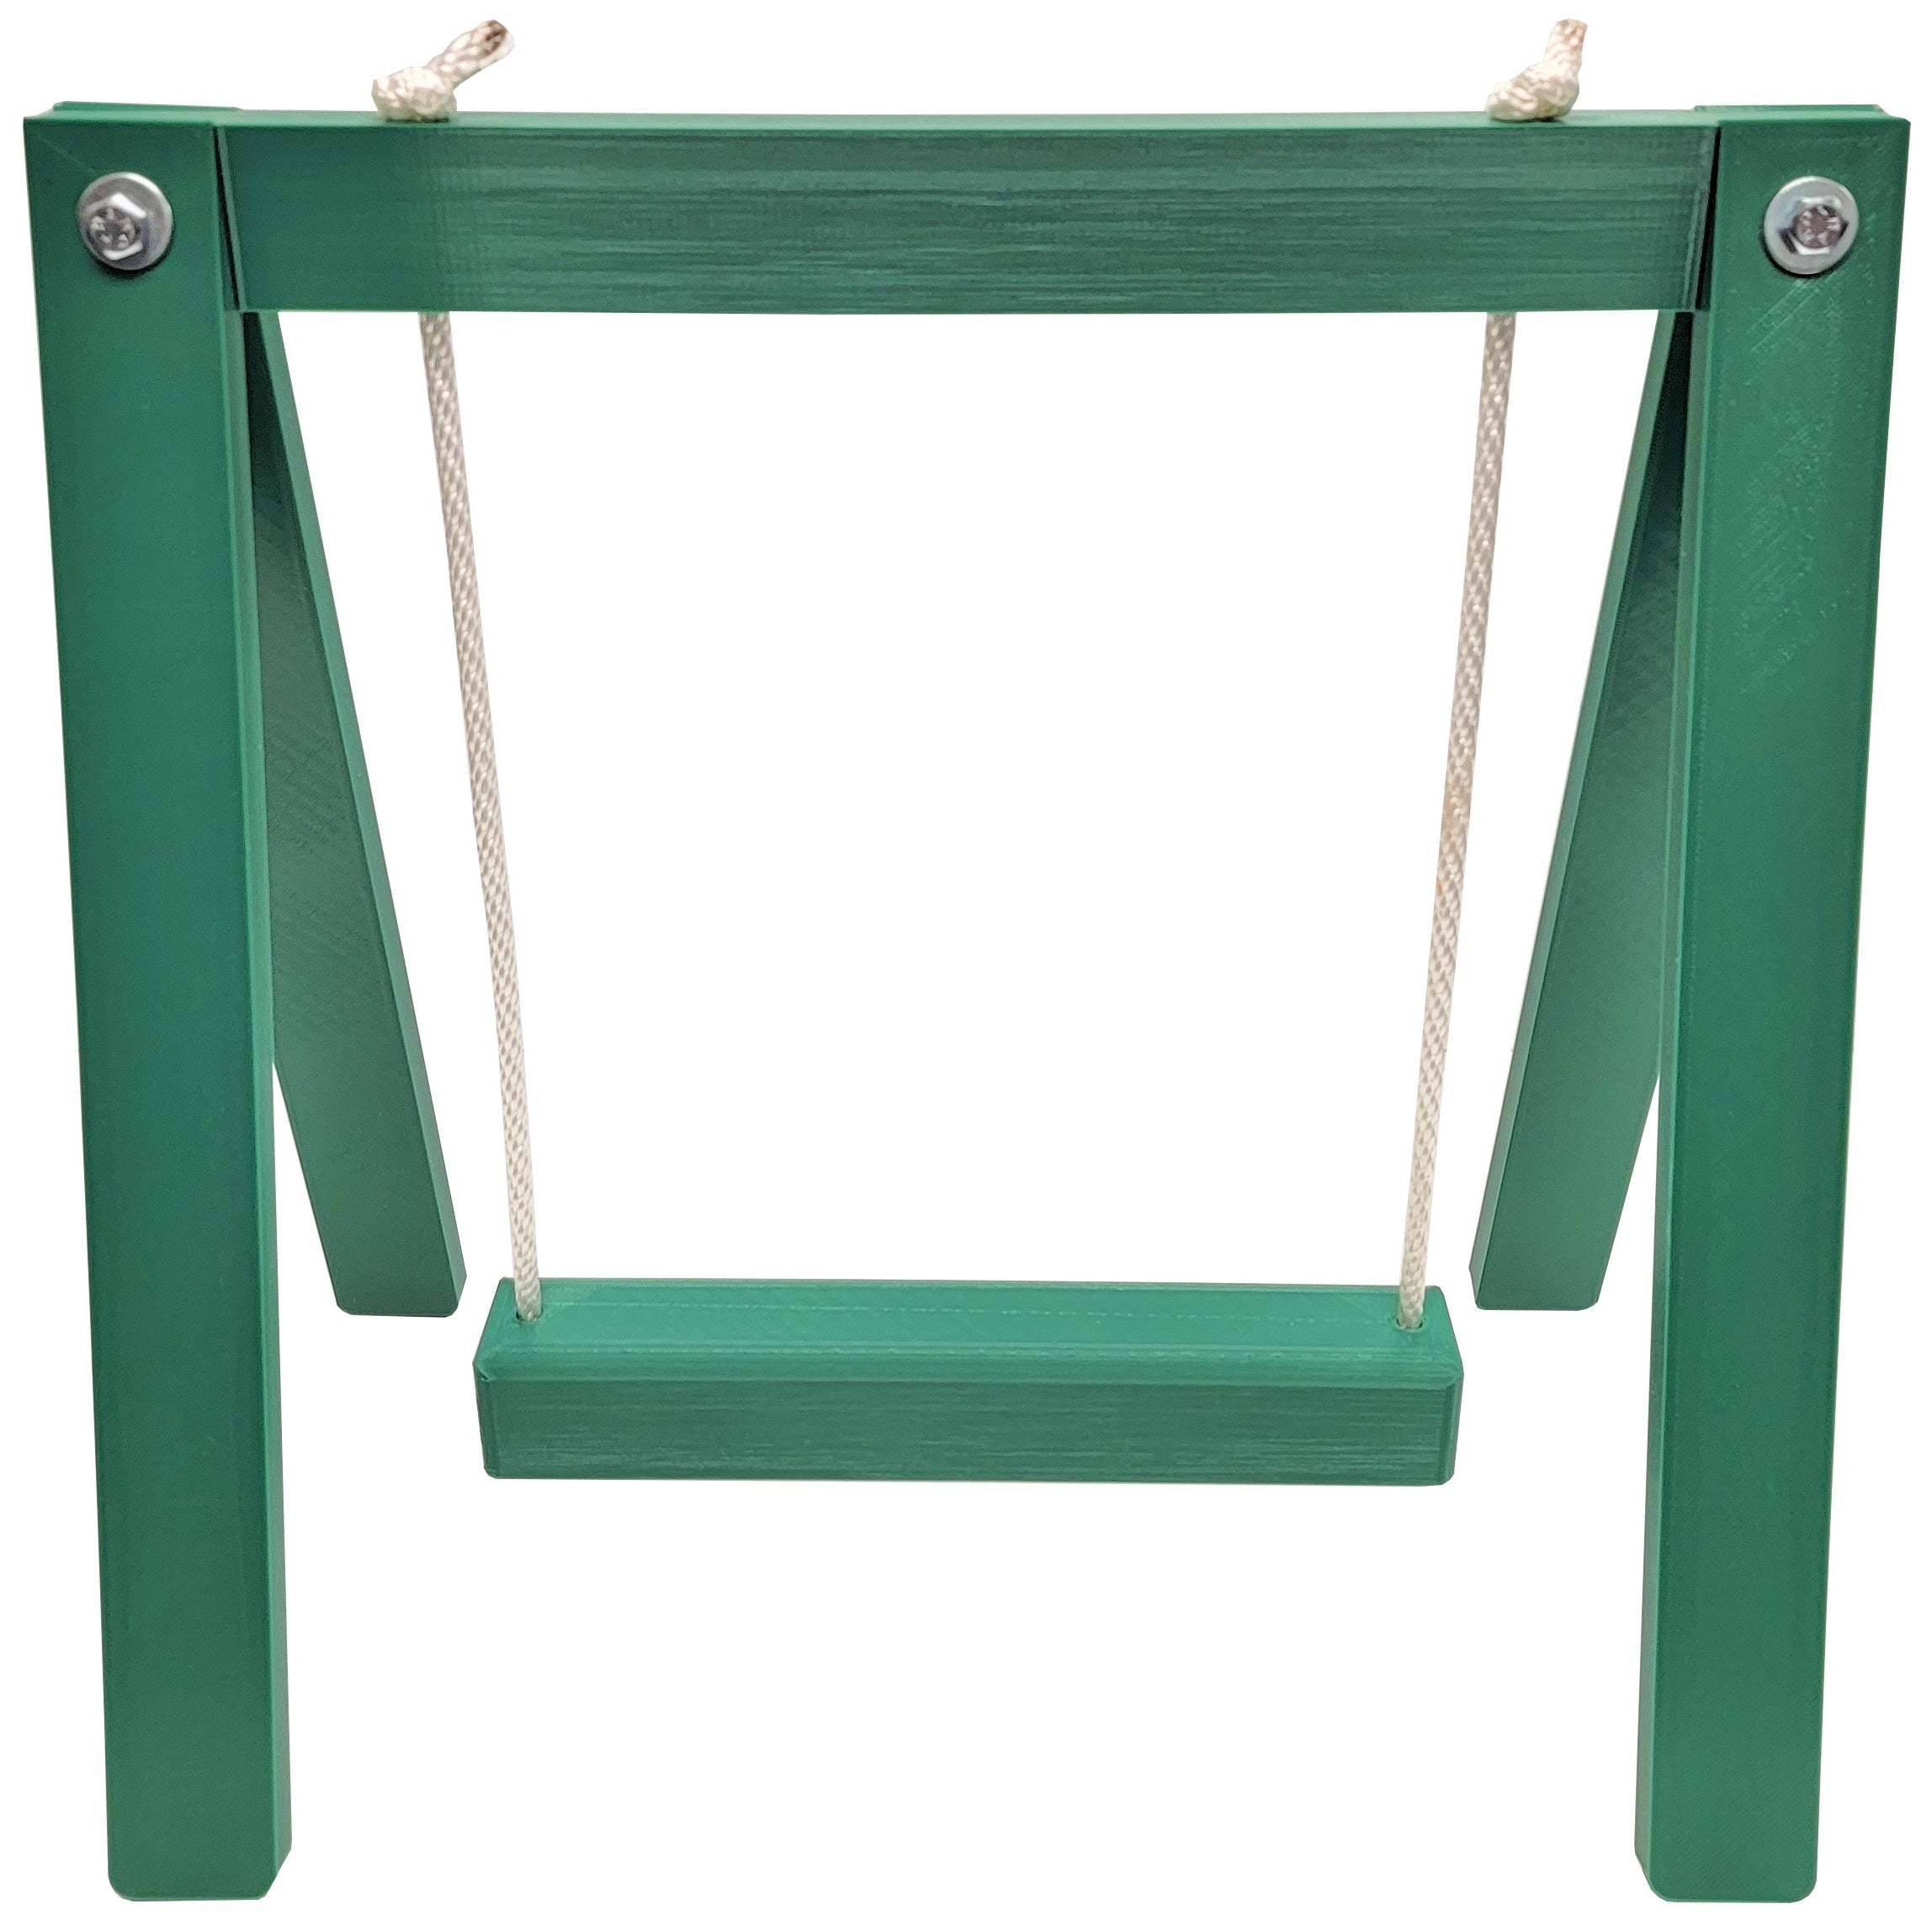 15 Inch Tall Green Chicken Swing Set Poultry Perch